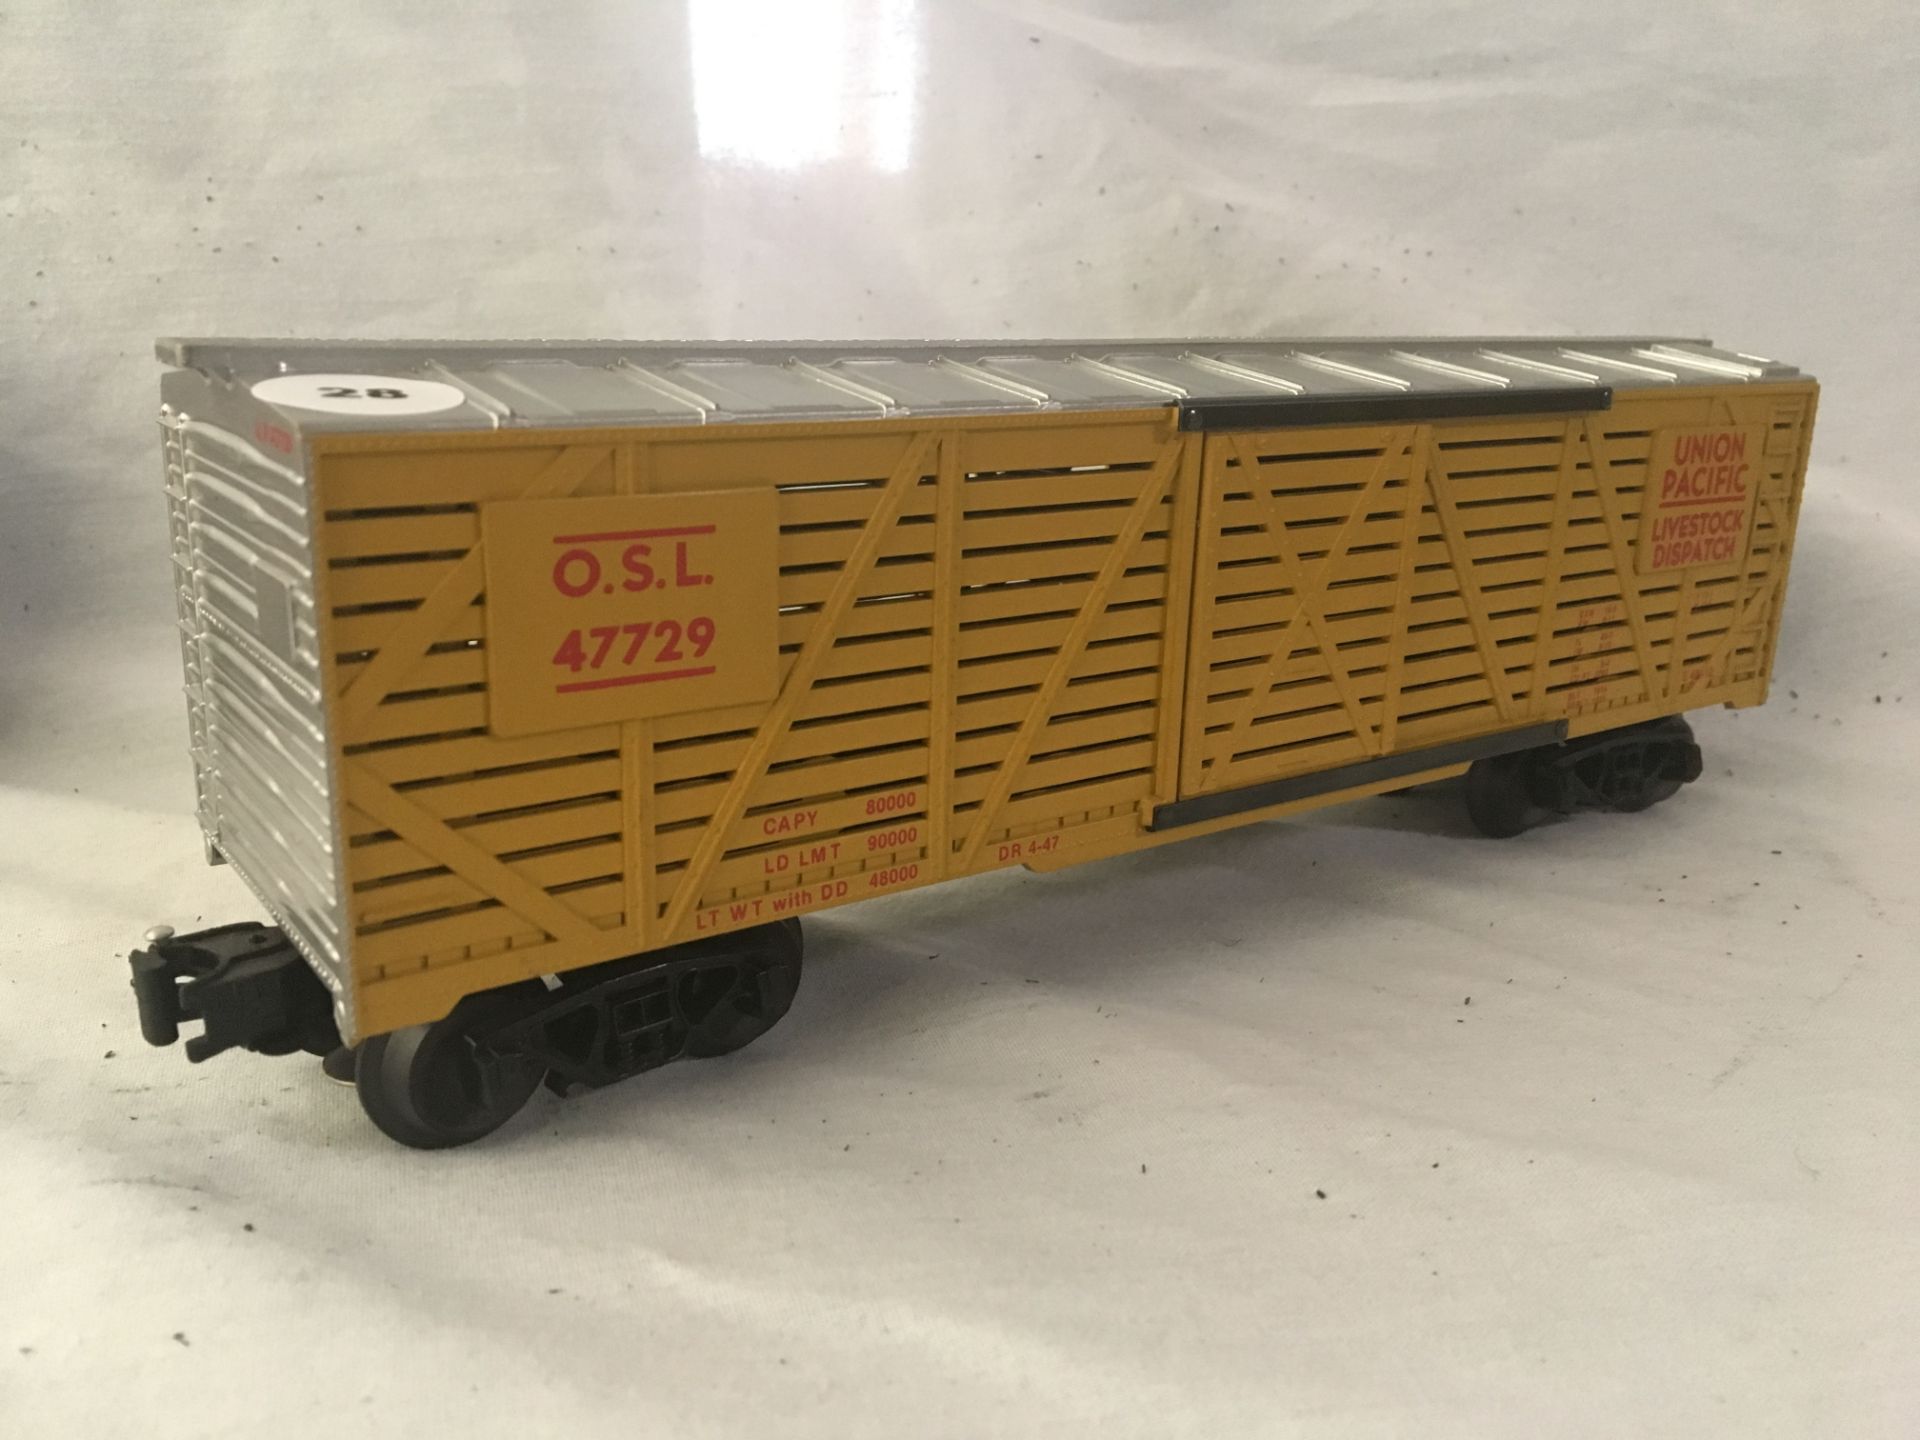 #47729 O.S.L. Union Pacific Livestock Dispatch with Live Action Sound